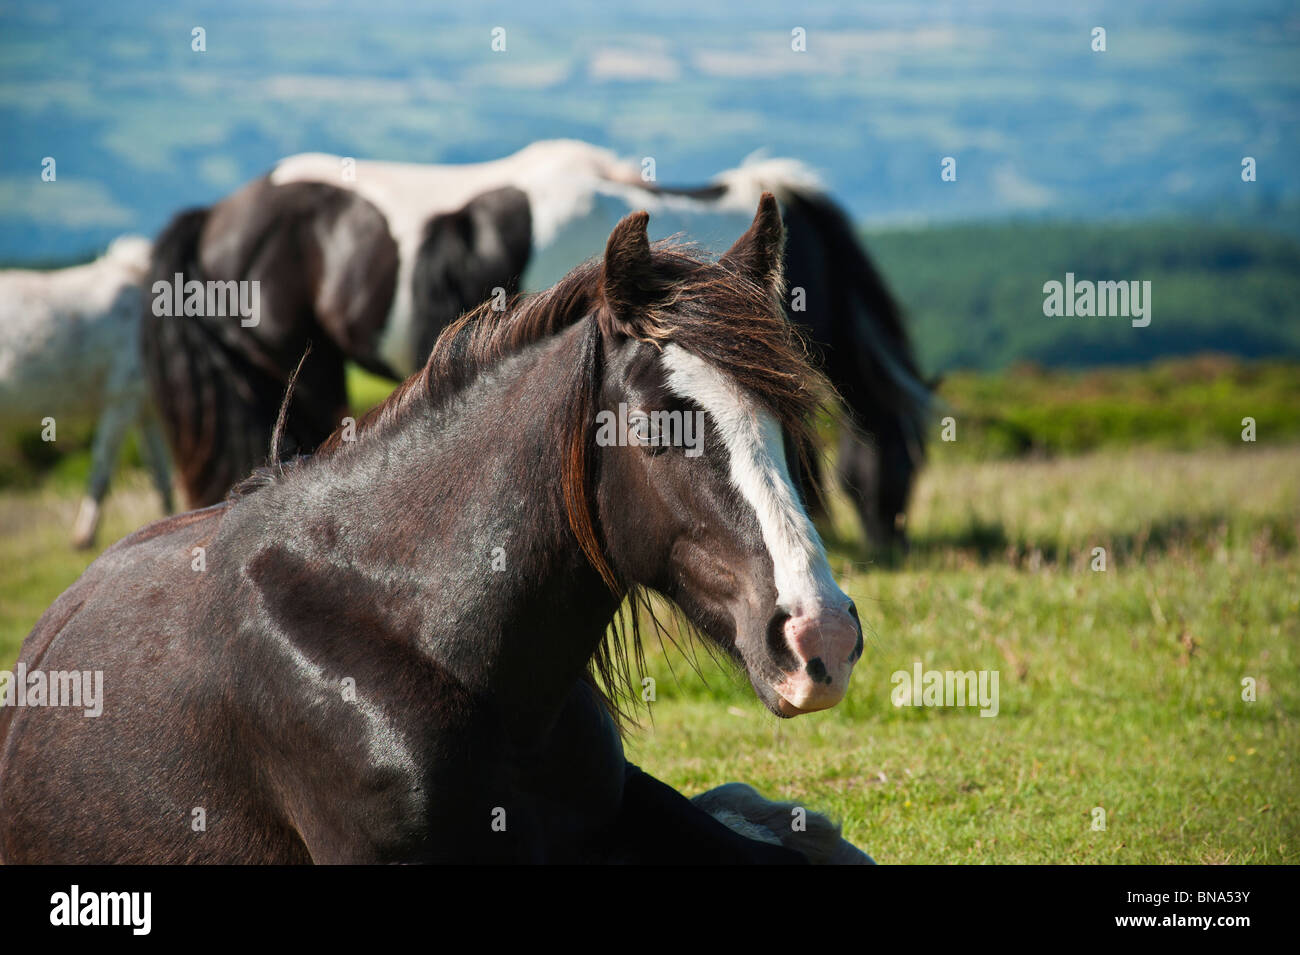 Welsh mountain pony sits on ground, Hay Bluff, Wales Stock Photo